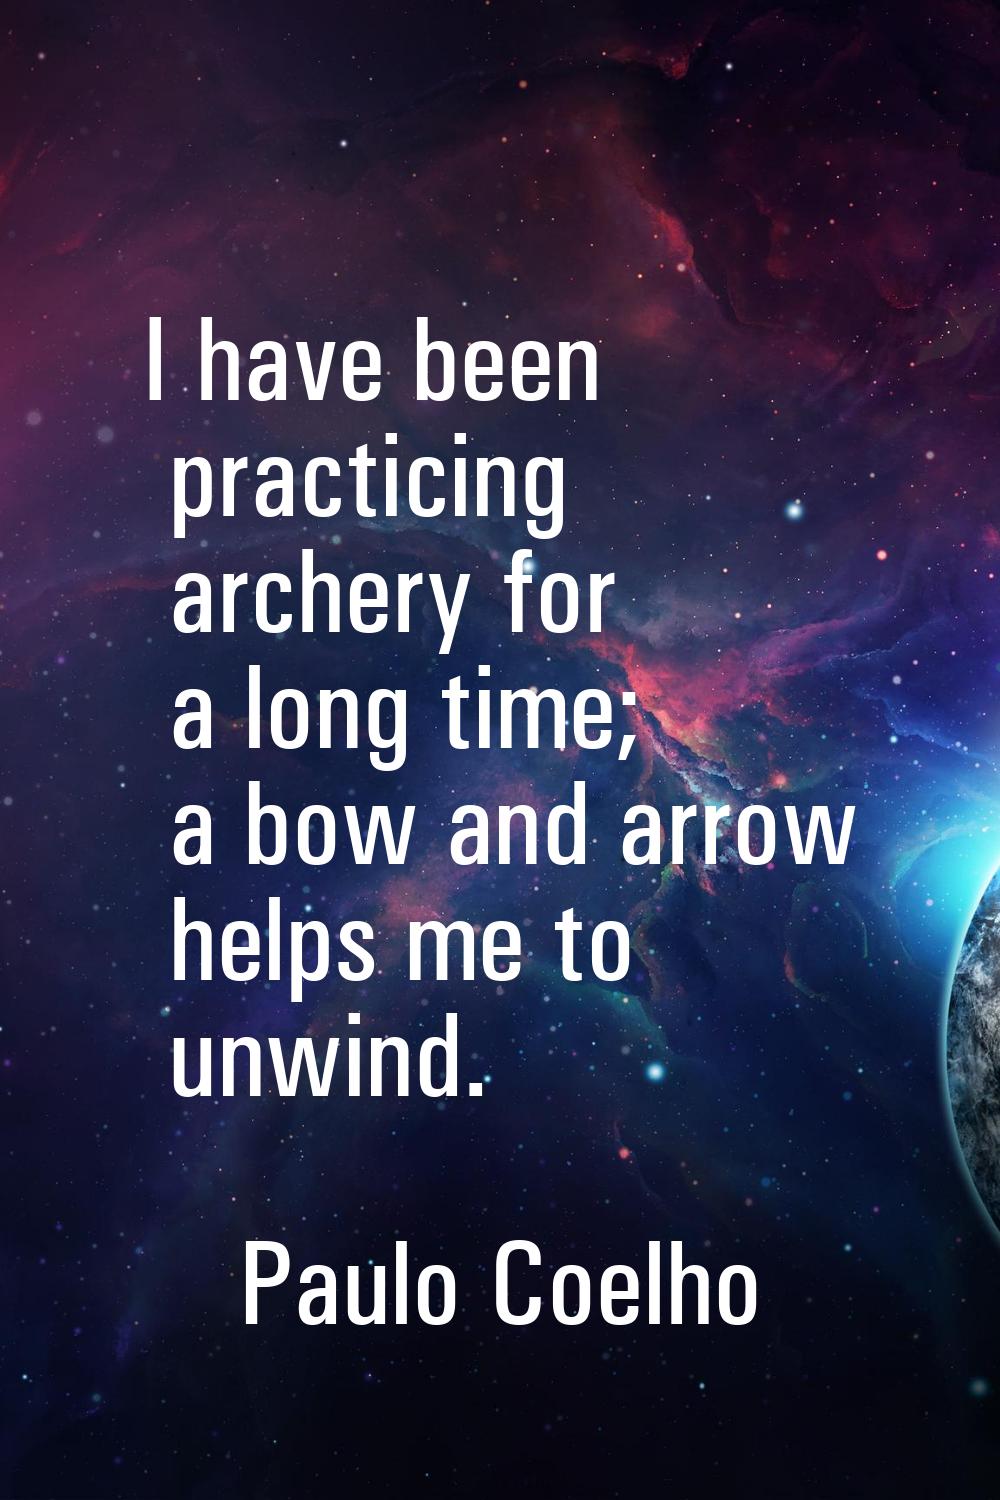 I have been practicing archery for a long time; a bow and arrow helps me to unwind.